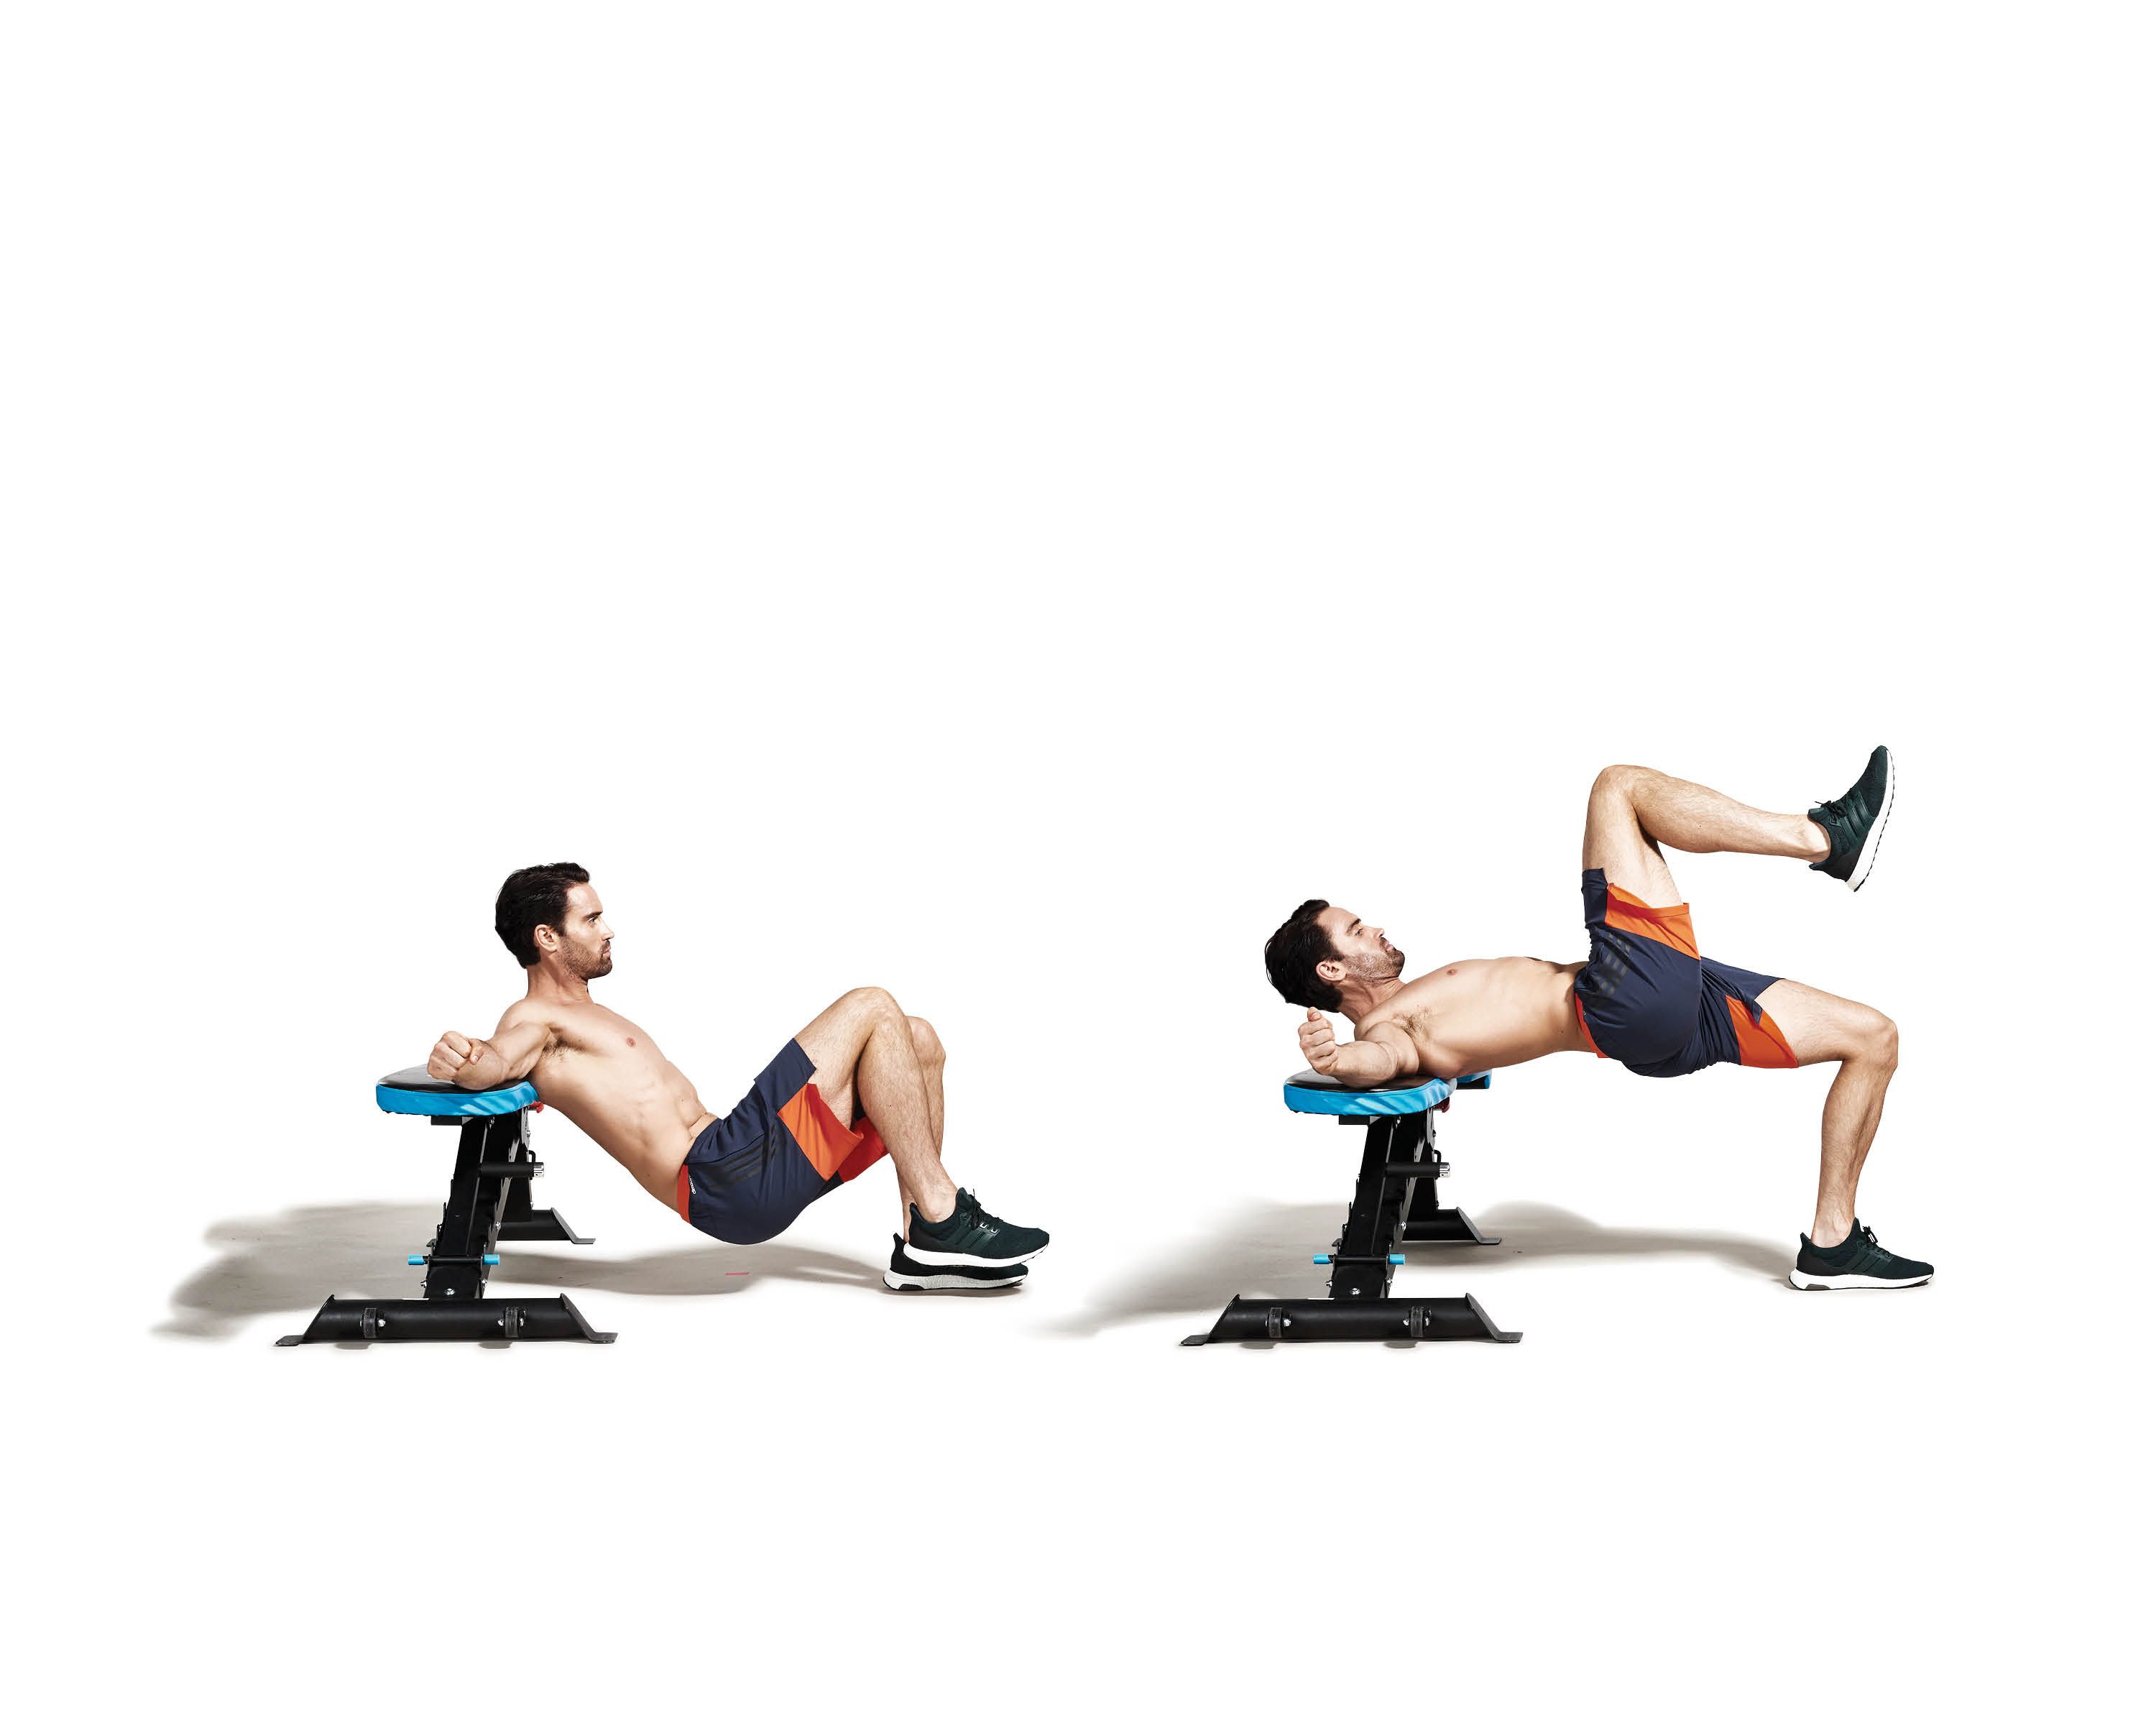 The 17 Best Home Leg Workout Moves You Can Do To Build Strength